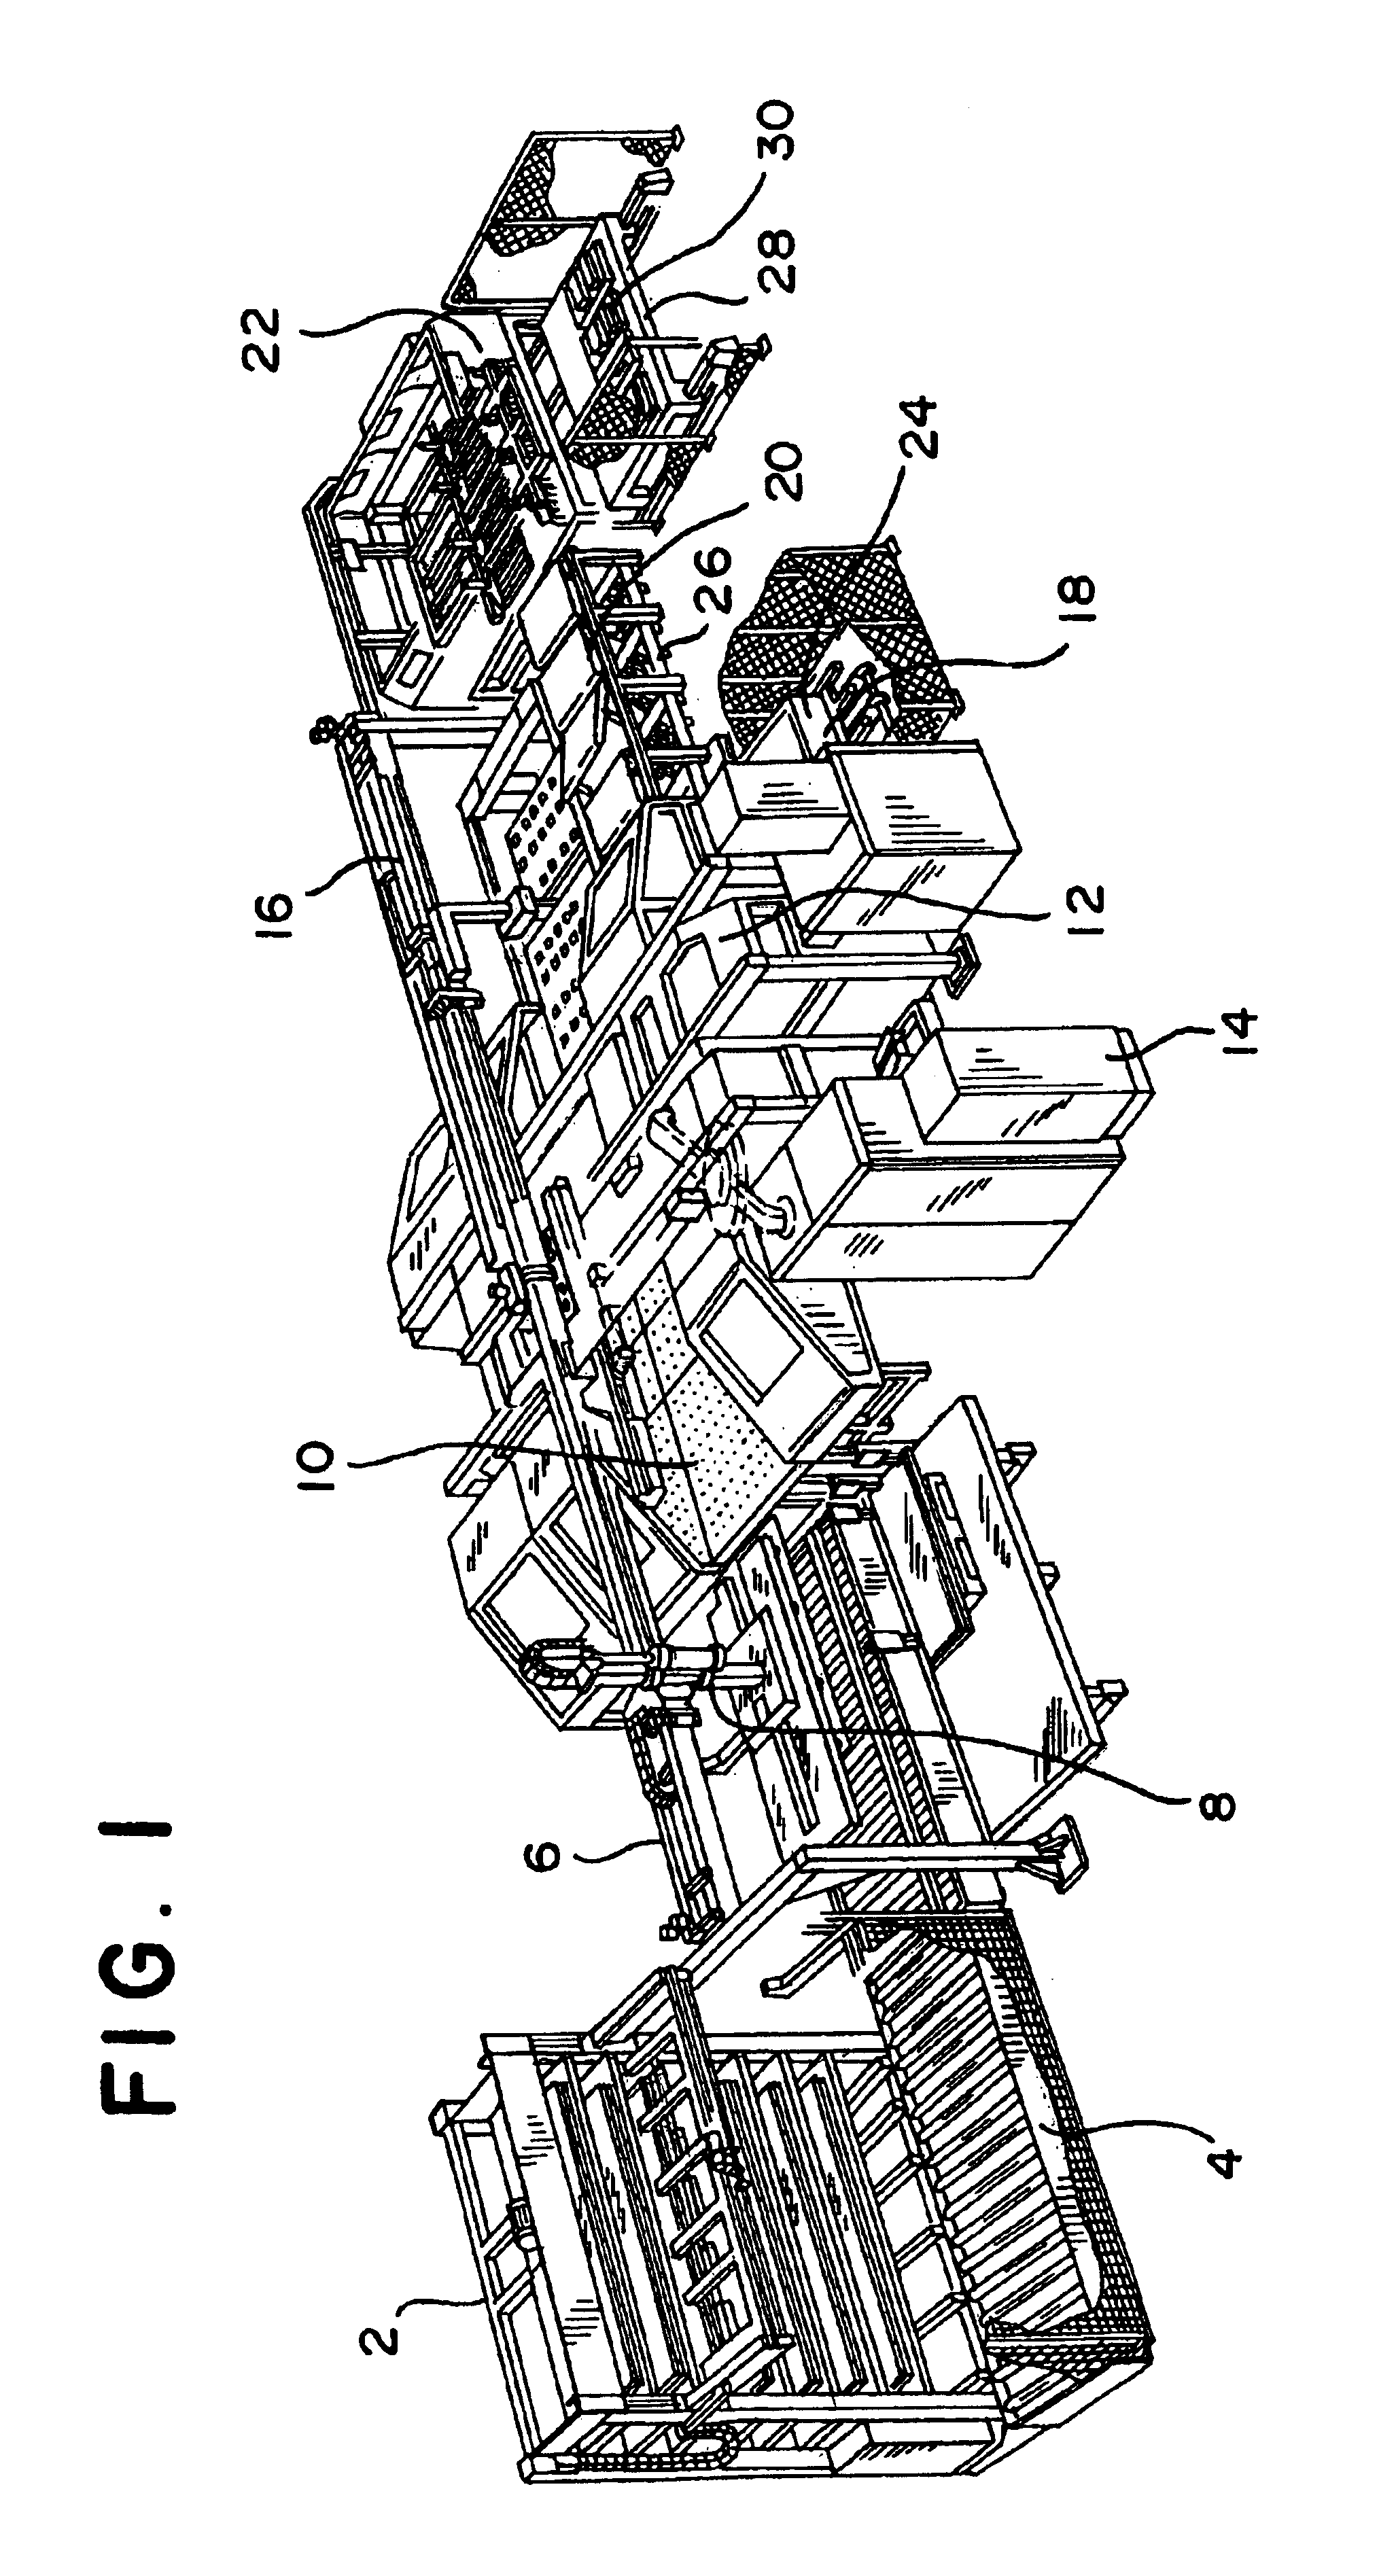 System and method of flexibly sorting and unloading finished parts during part manufacturing process